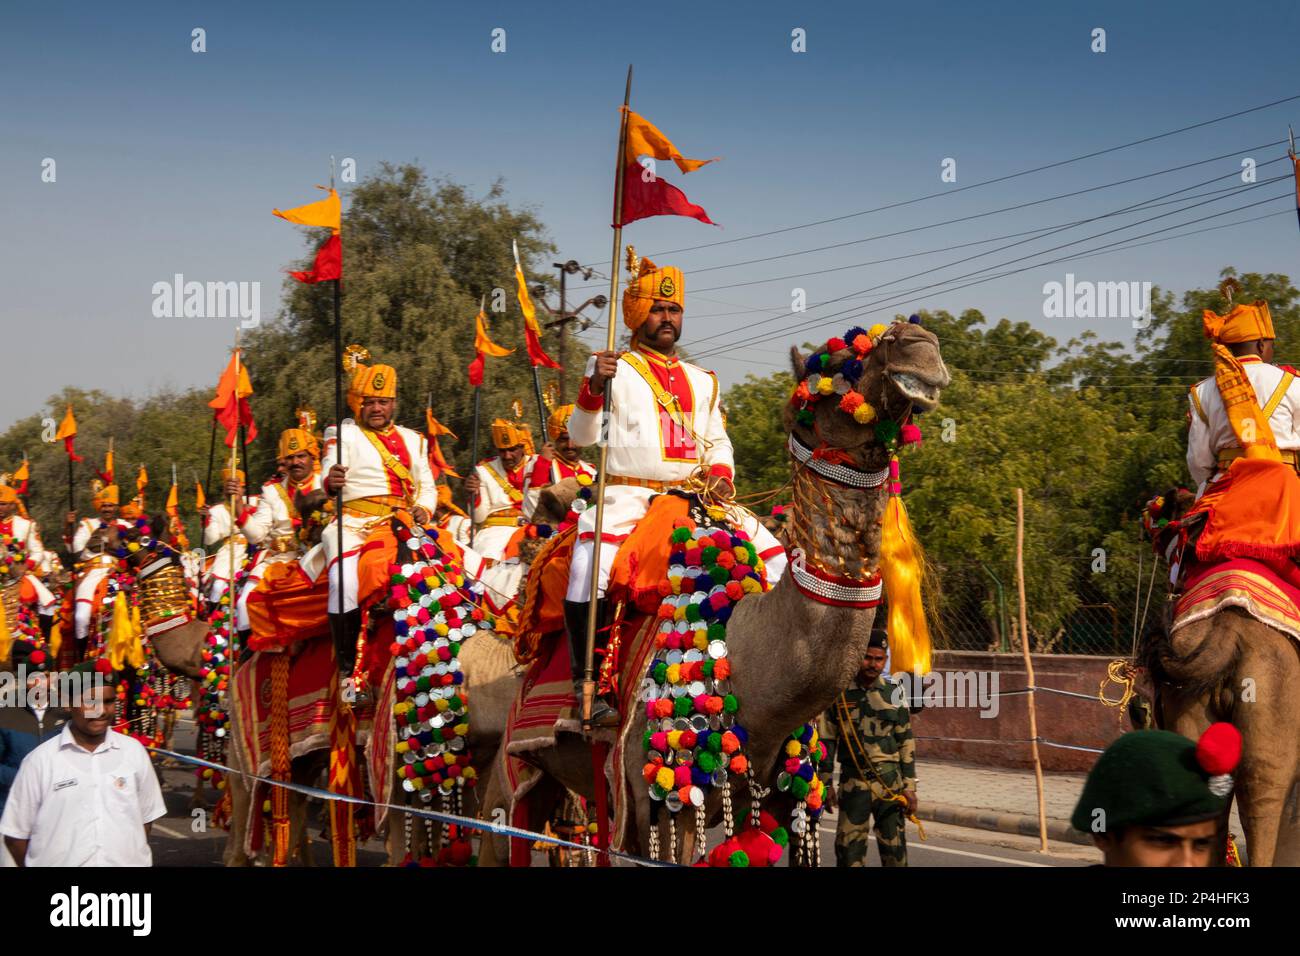 India, Rajasthan, Bikaner, Camel Festival Parade,  camel-mounted Border Security Force soldiers in dress uniform Stock Photo